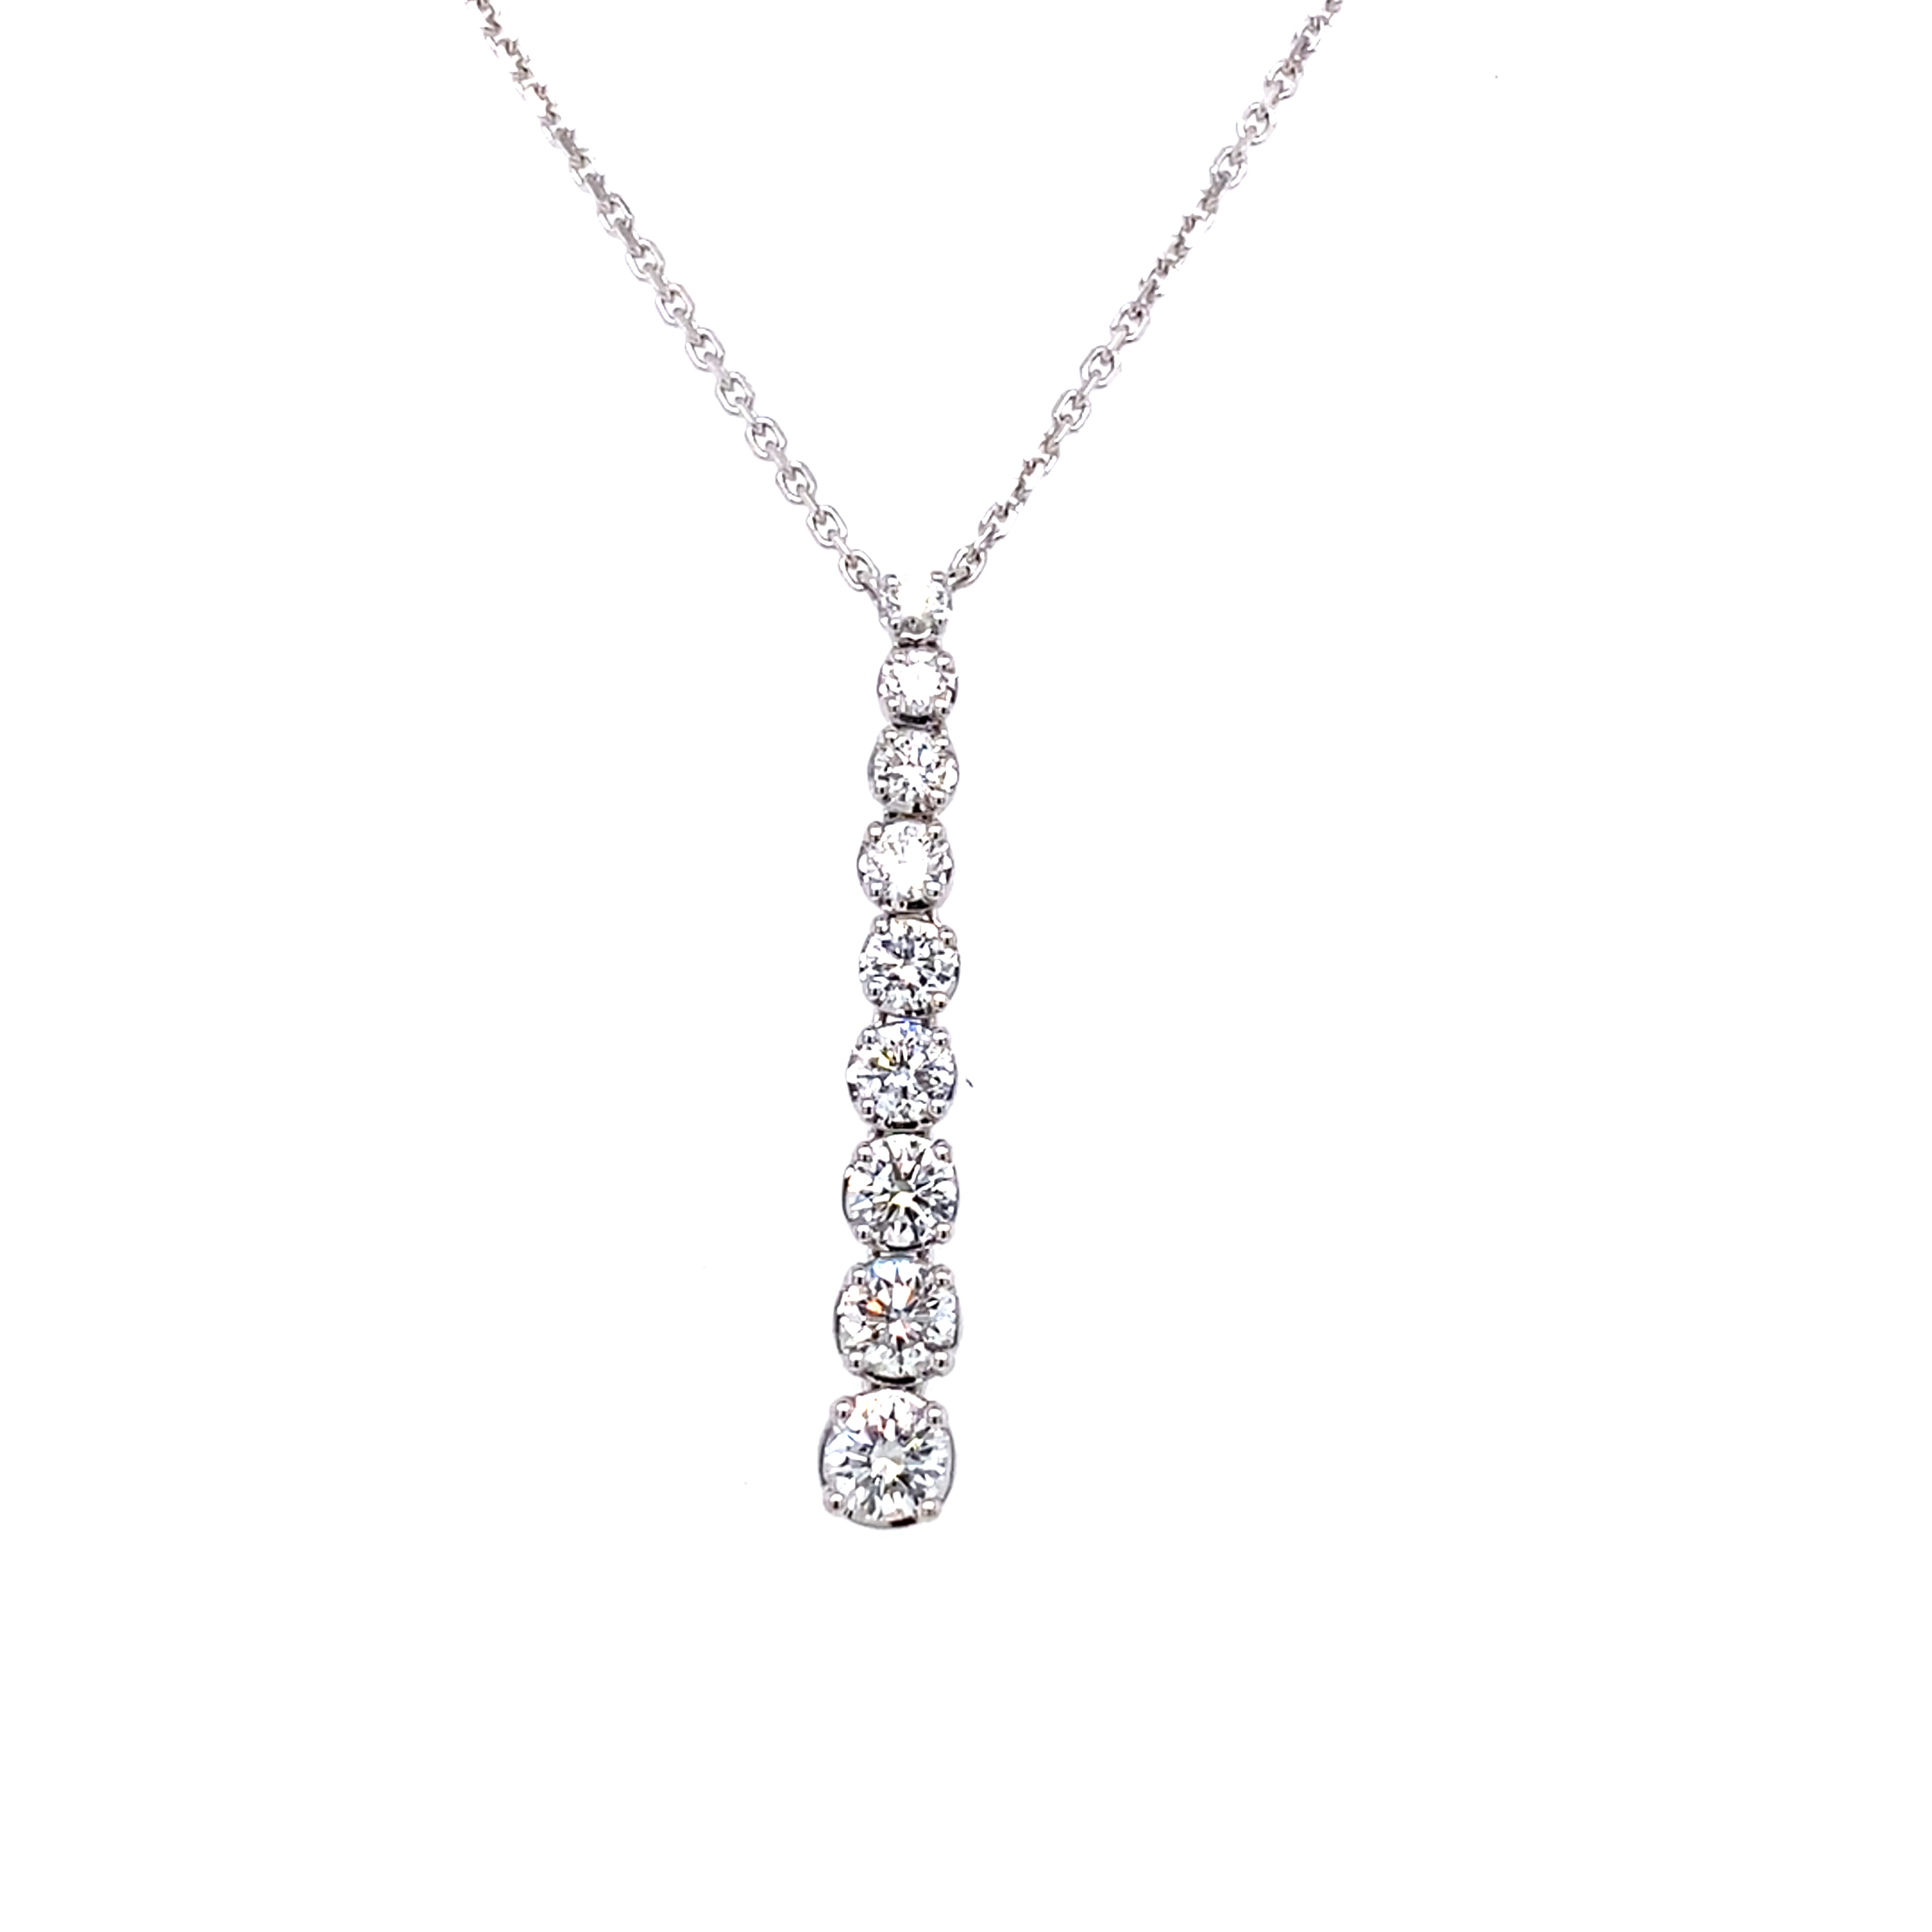 18 Carat White Gold and Diamond Line Necklace